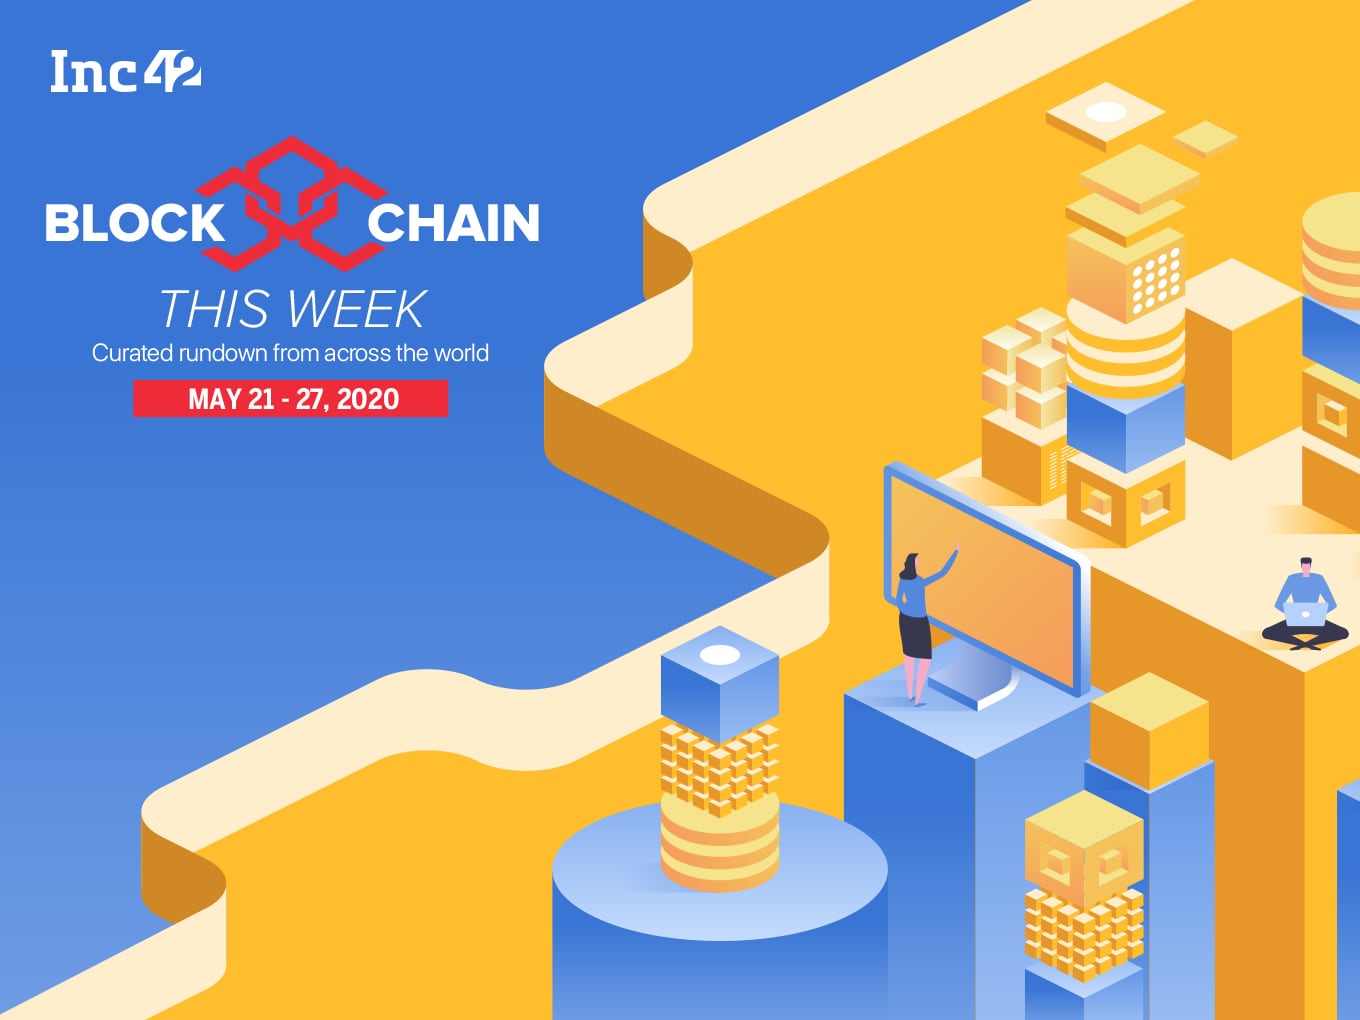 Blockchain This Week: Facebook Renames Blockchain Division, Tencent To Invest $70 Bn Into Emerging Technologies & More